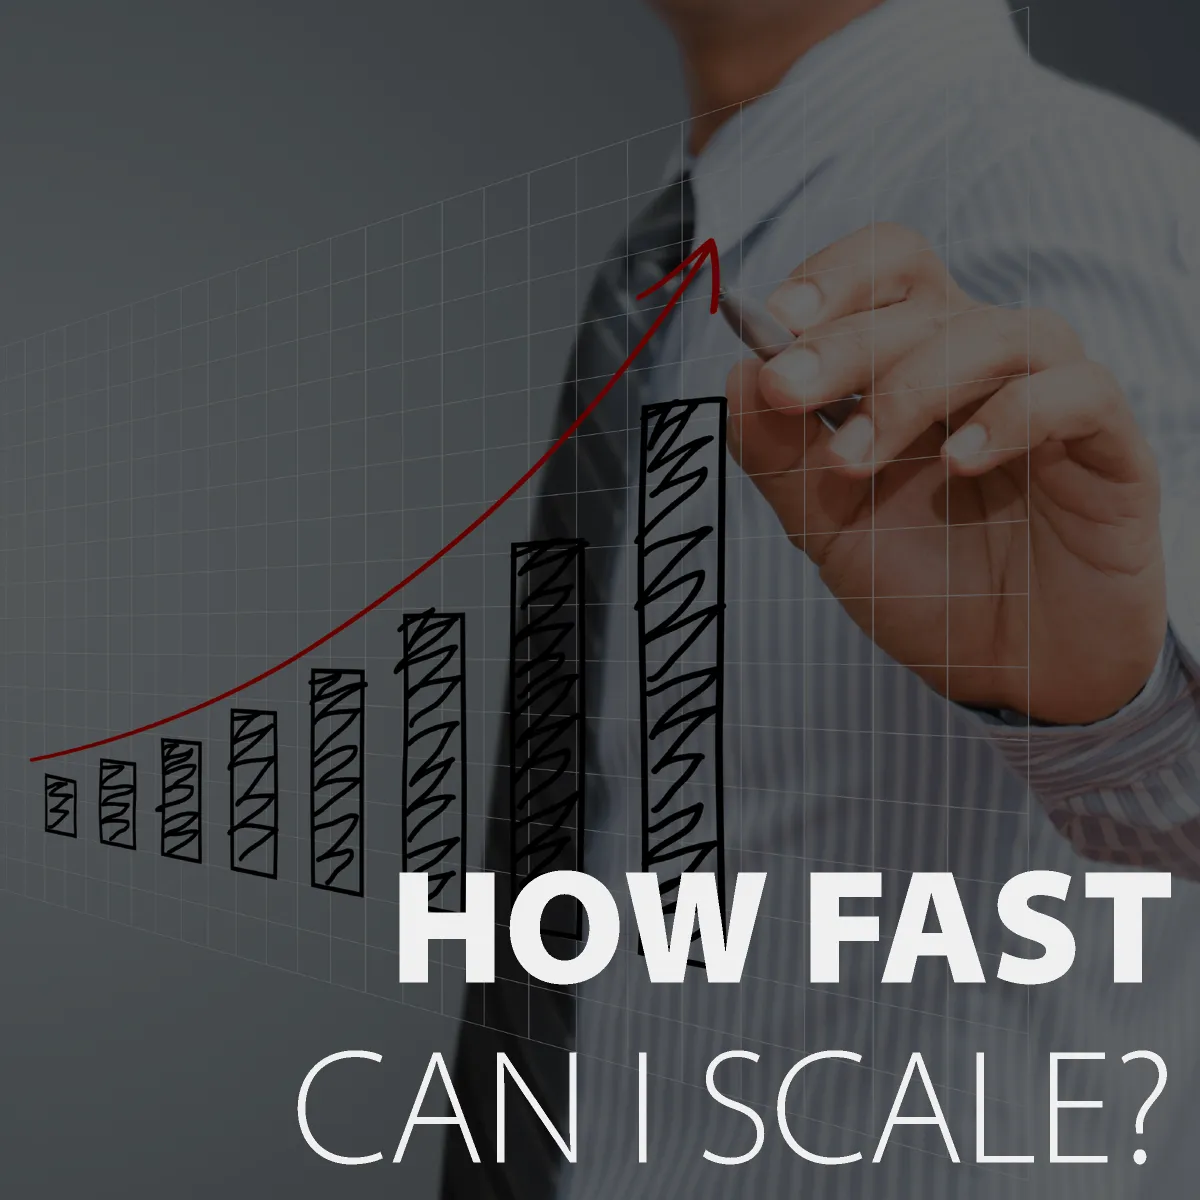 How fast can I scale?